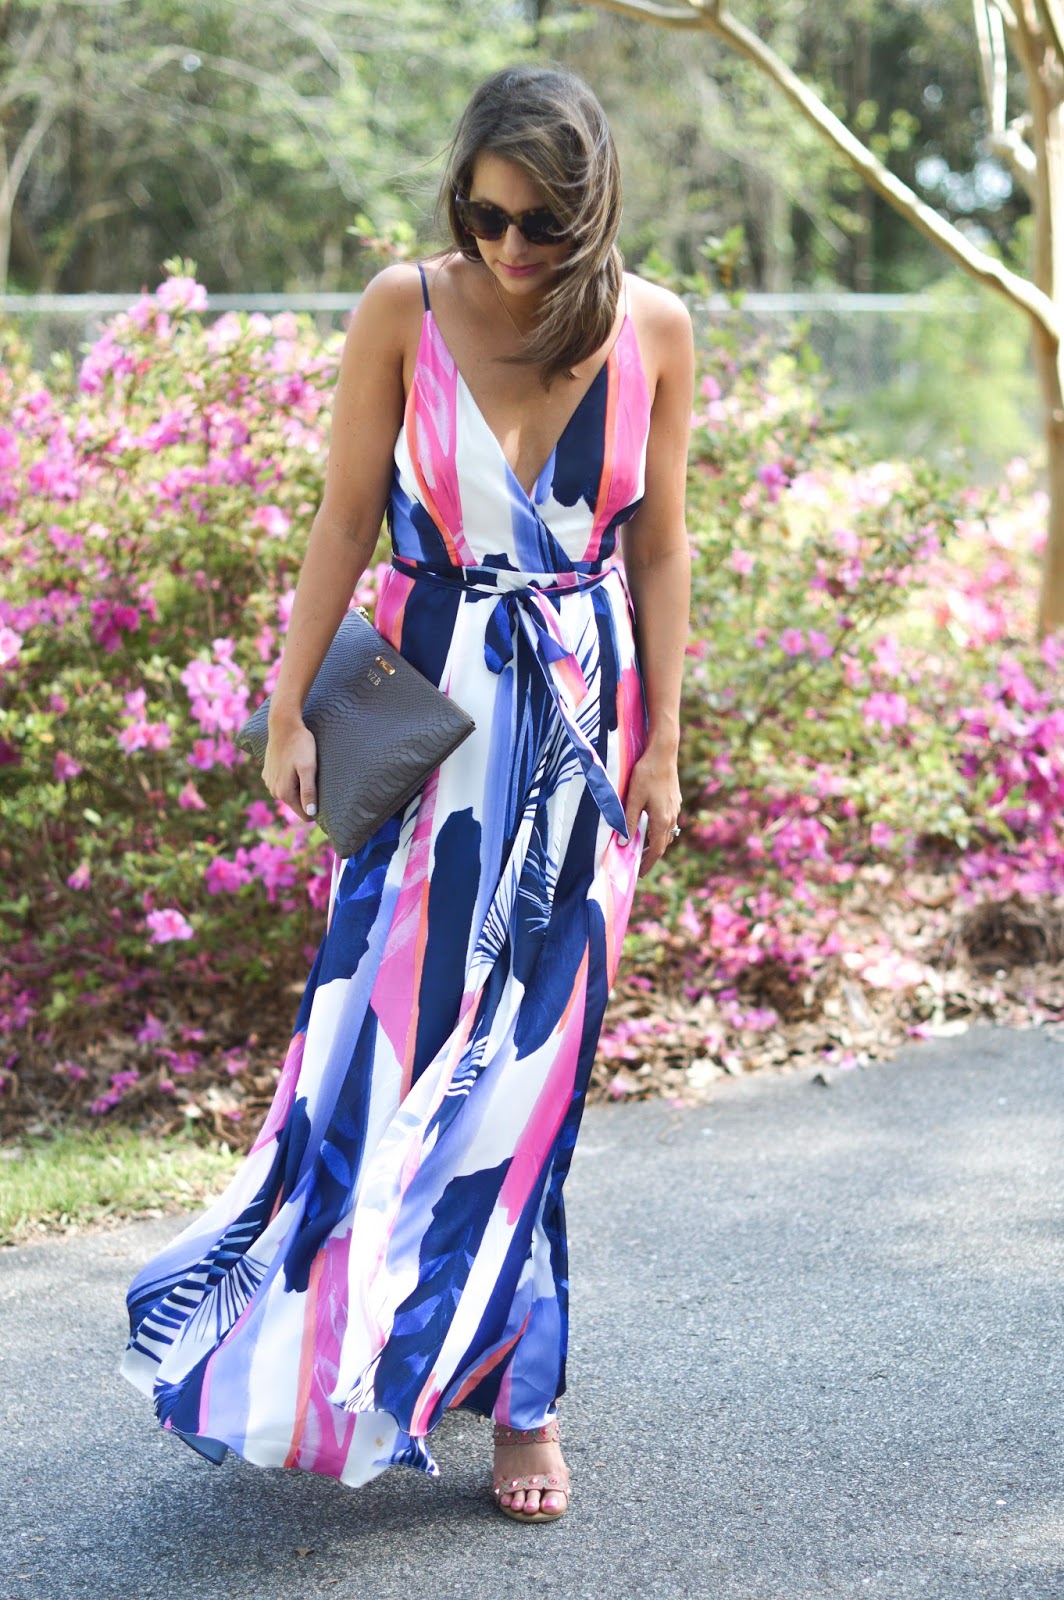 Garden Party Ready | Southern Style | a life + style blog